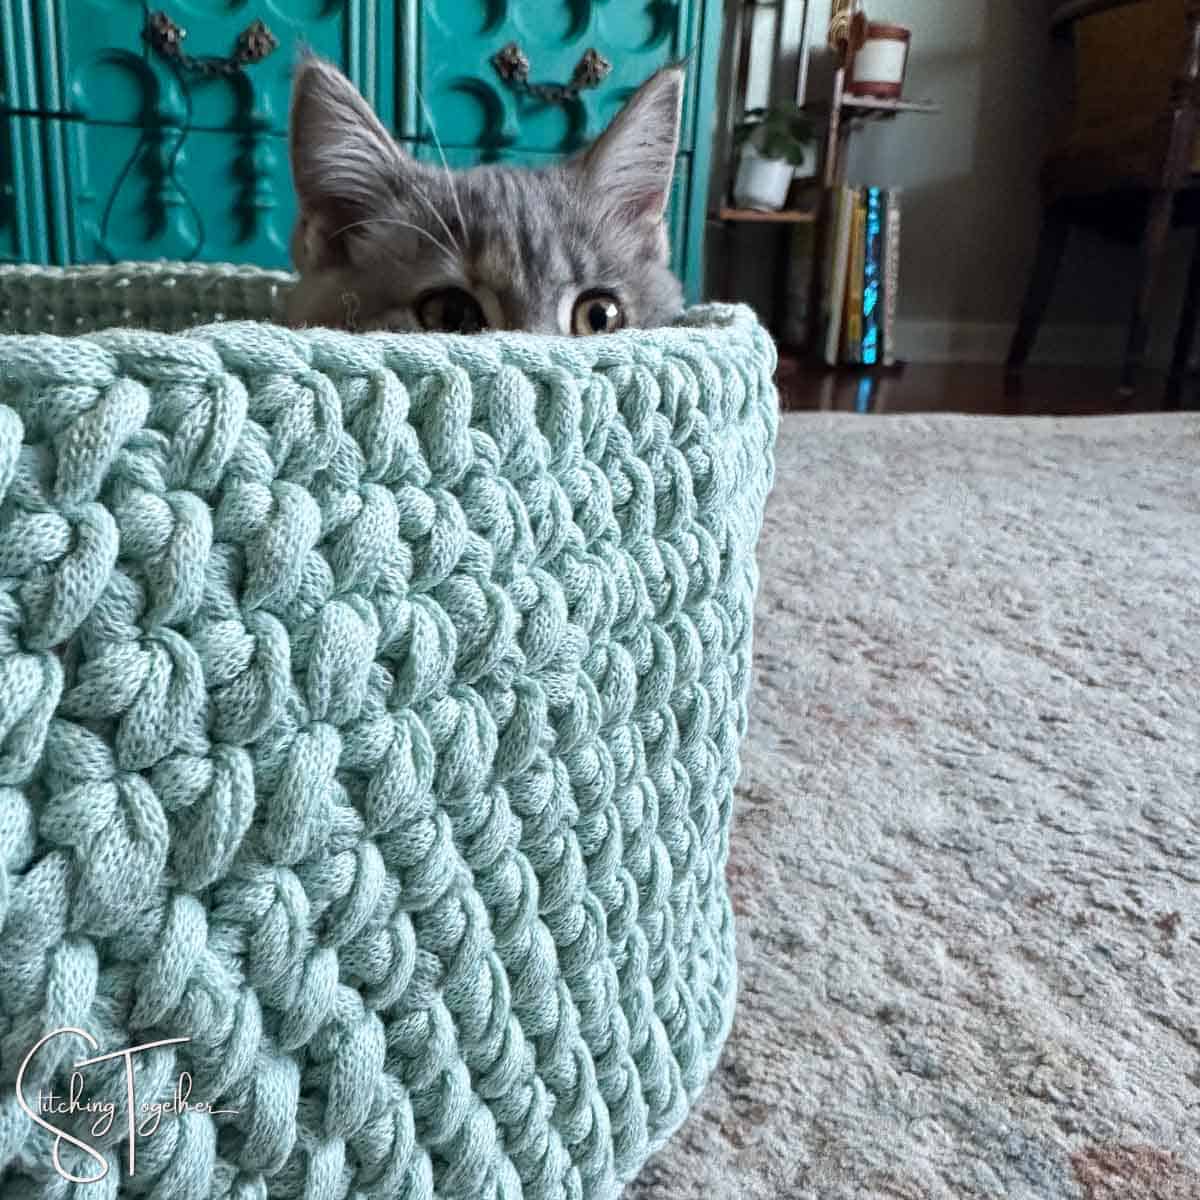 part of a kitten's face peeking over the side of a crochet cat bed